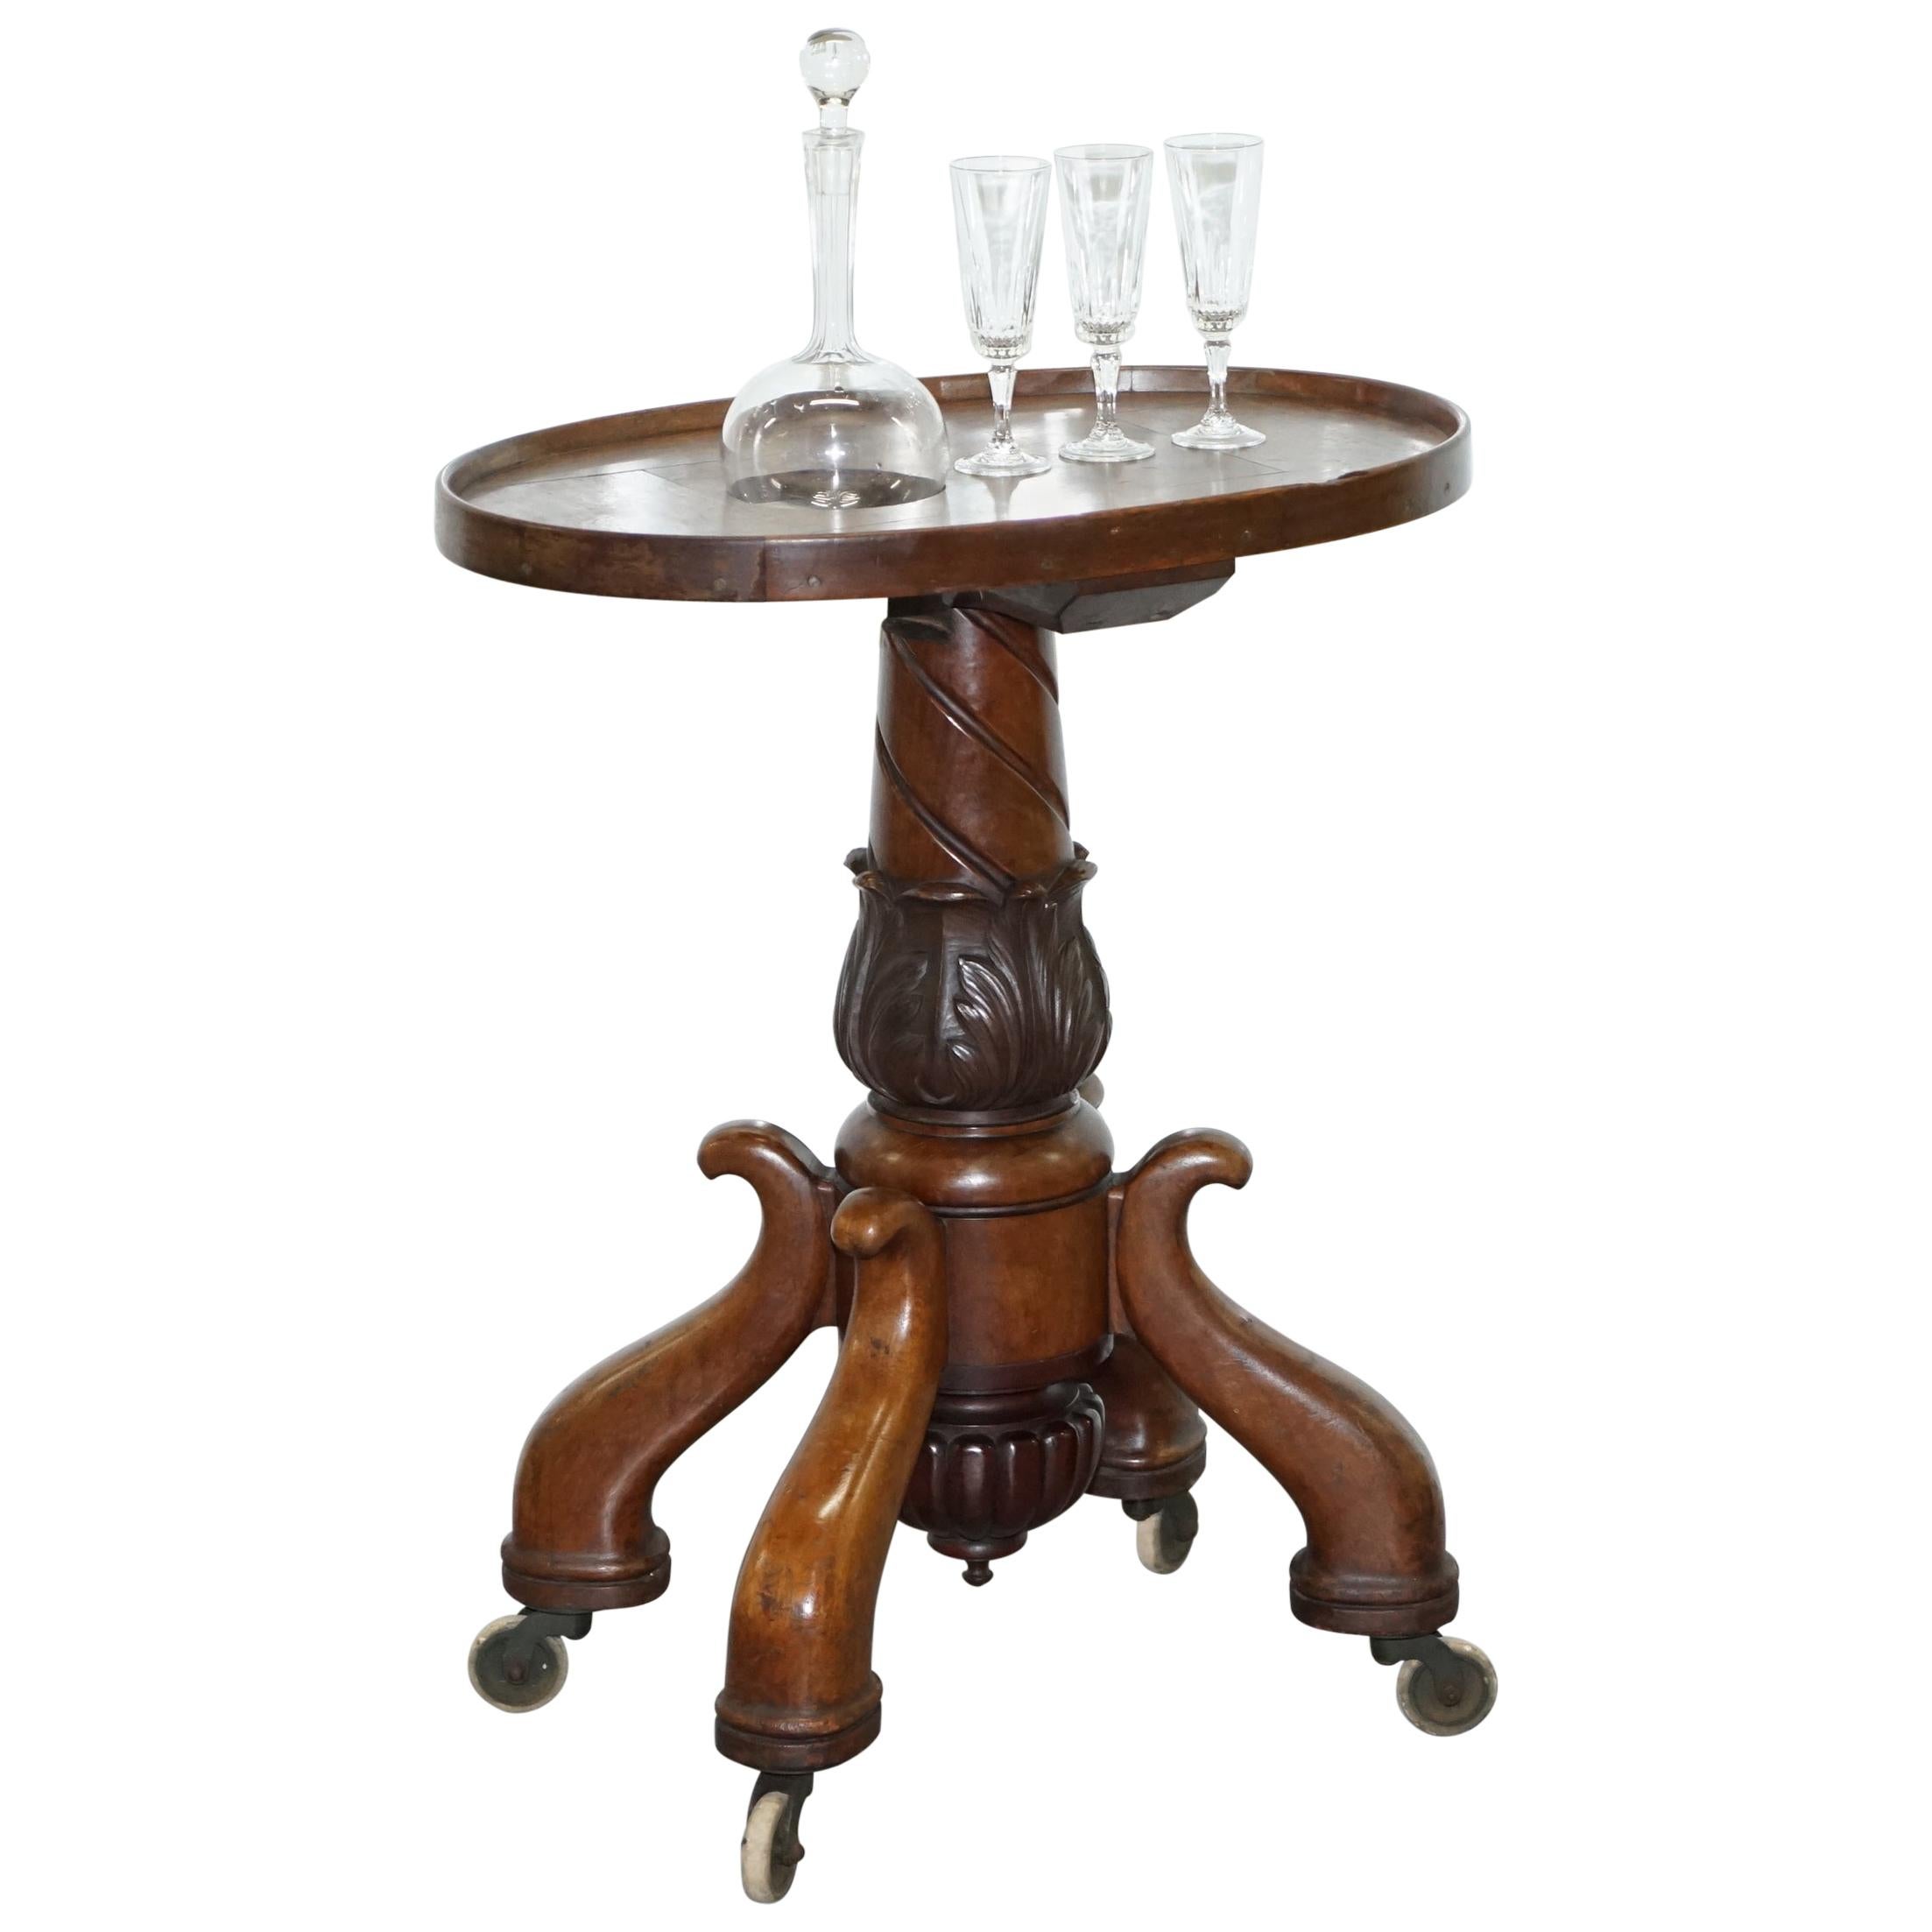 Rare Victorian 1860 Hardwood Drinks Table with Crystal Decanter & Glasses Wheels For Sale